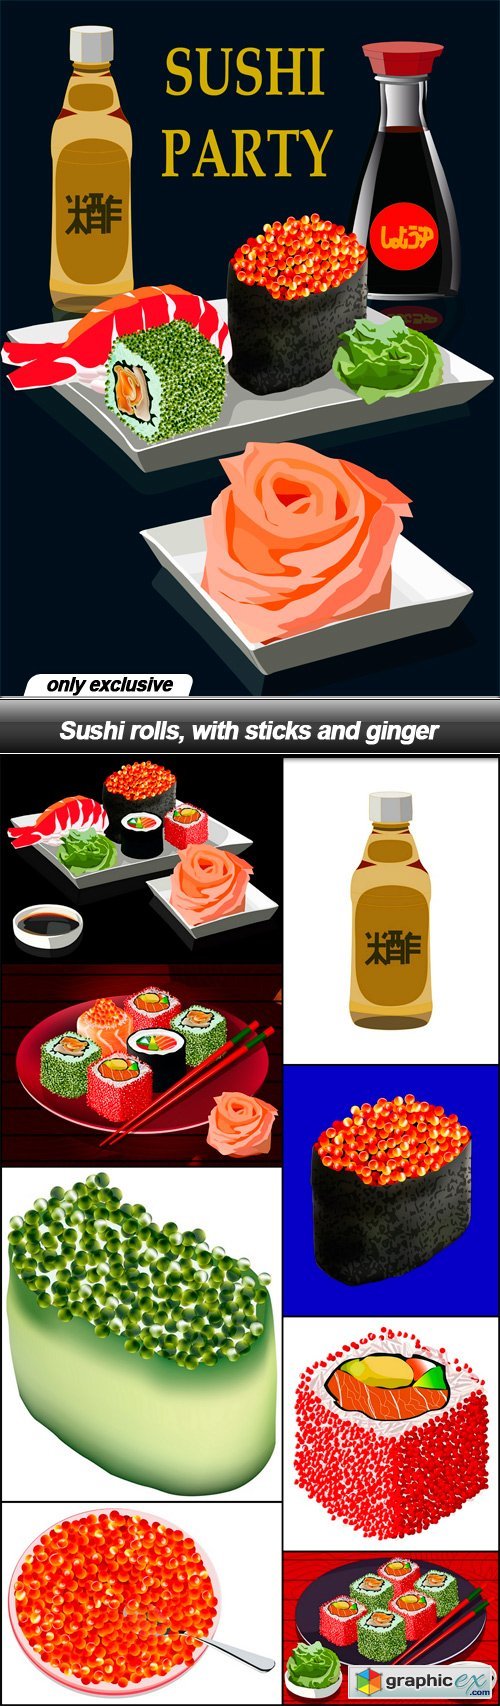 Sushi rolls, with sticks and ginger - 9 EPS